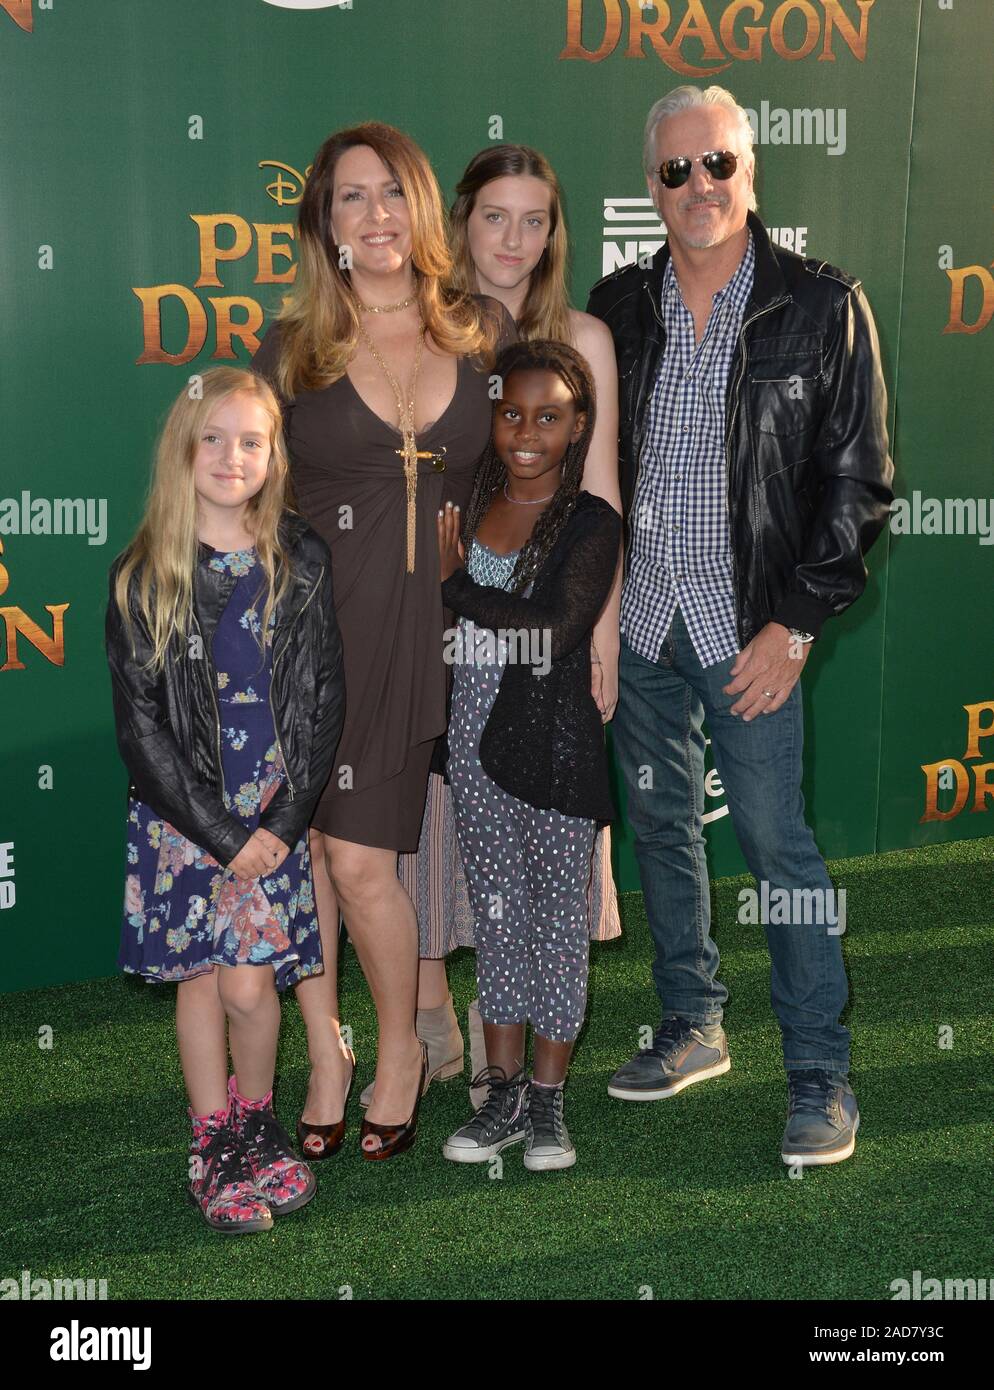 LOS ANGELES, CA. August 8, 2016: Actress Joely Fisher & husband Christopher Duddy & daughters True, Olivia & Skylar at the world premiere of Disney's 'Pete's Dragon' at the El Capitan Theatre, Hollywood. © 2016 Paul Smith / Featureflash Stock Photo